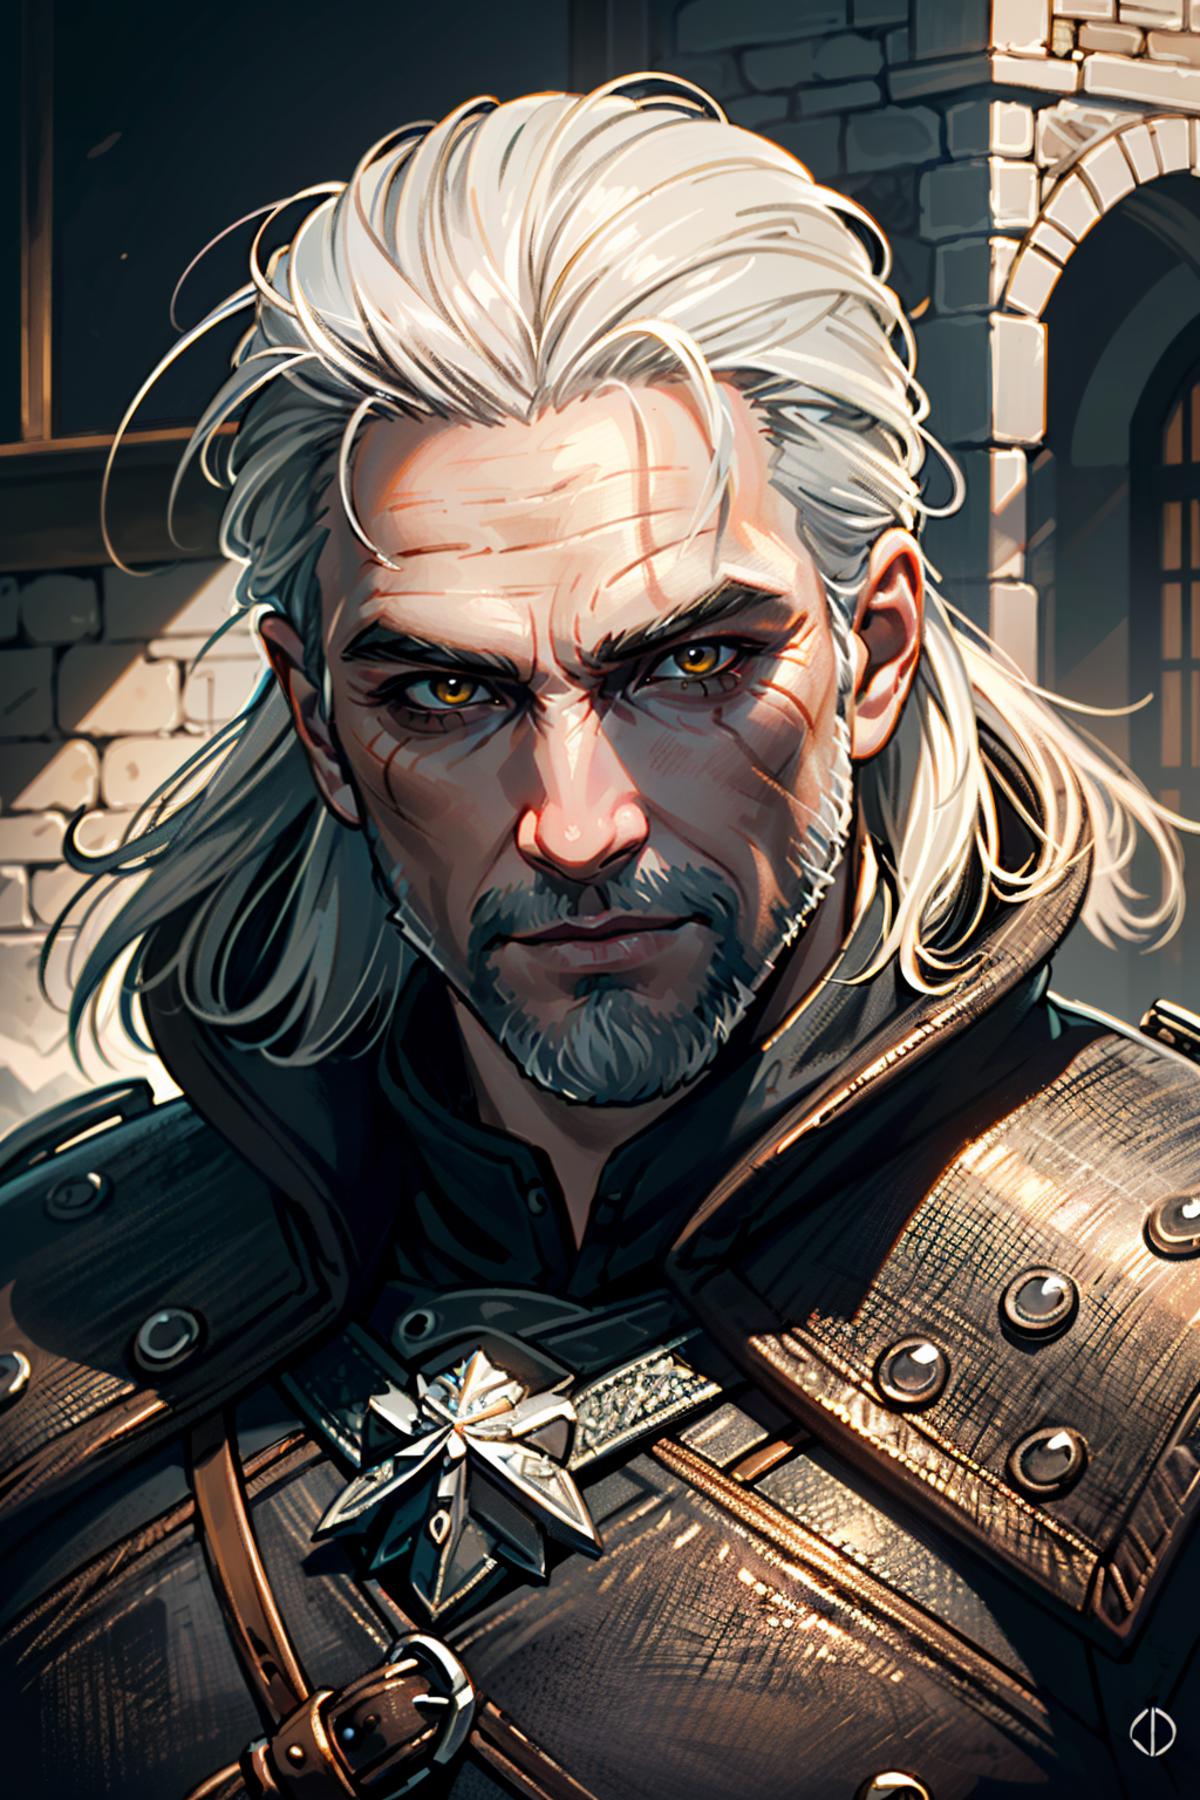 Geralt from The Witcher 3 image by BloodRedKittie